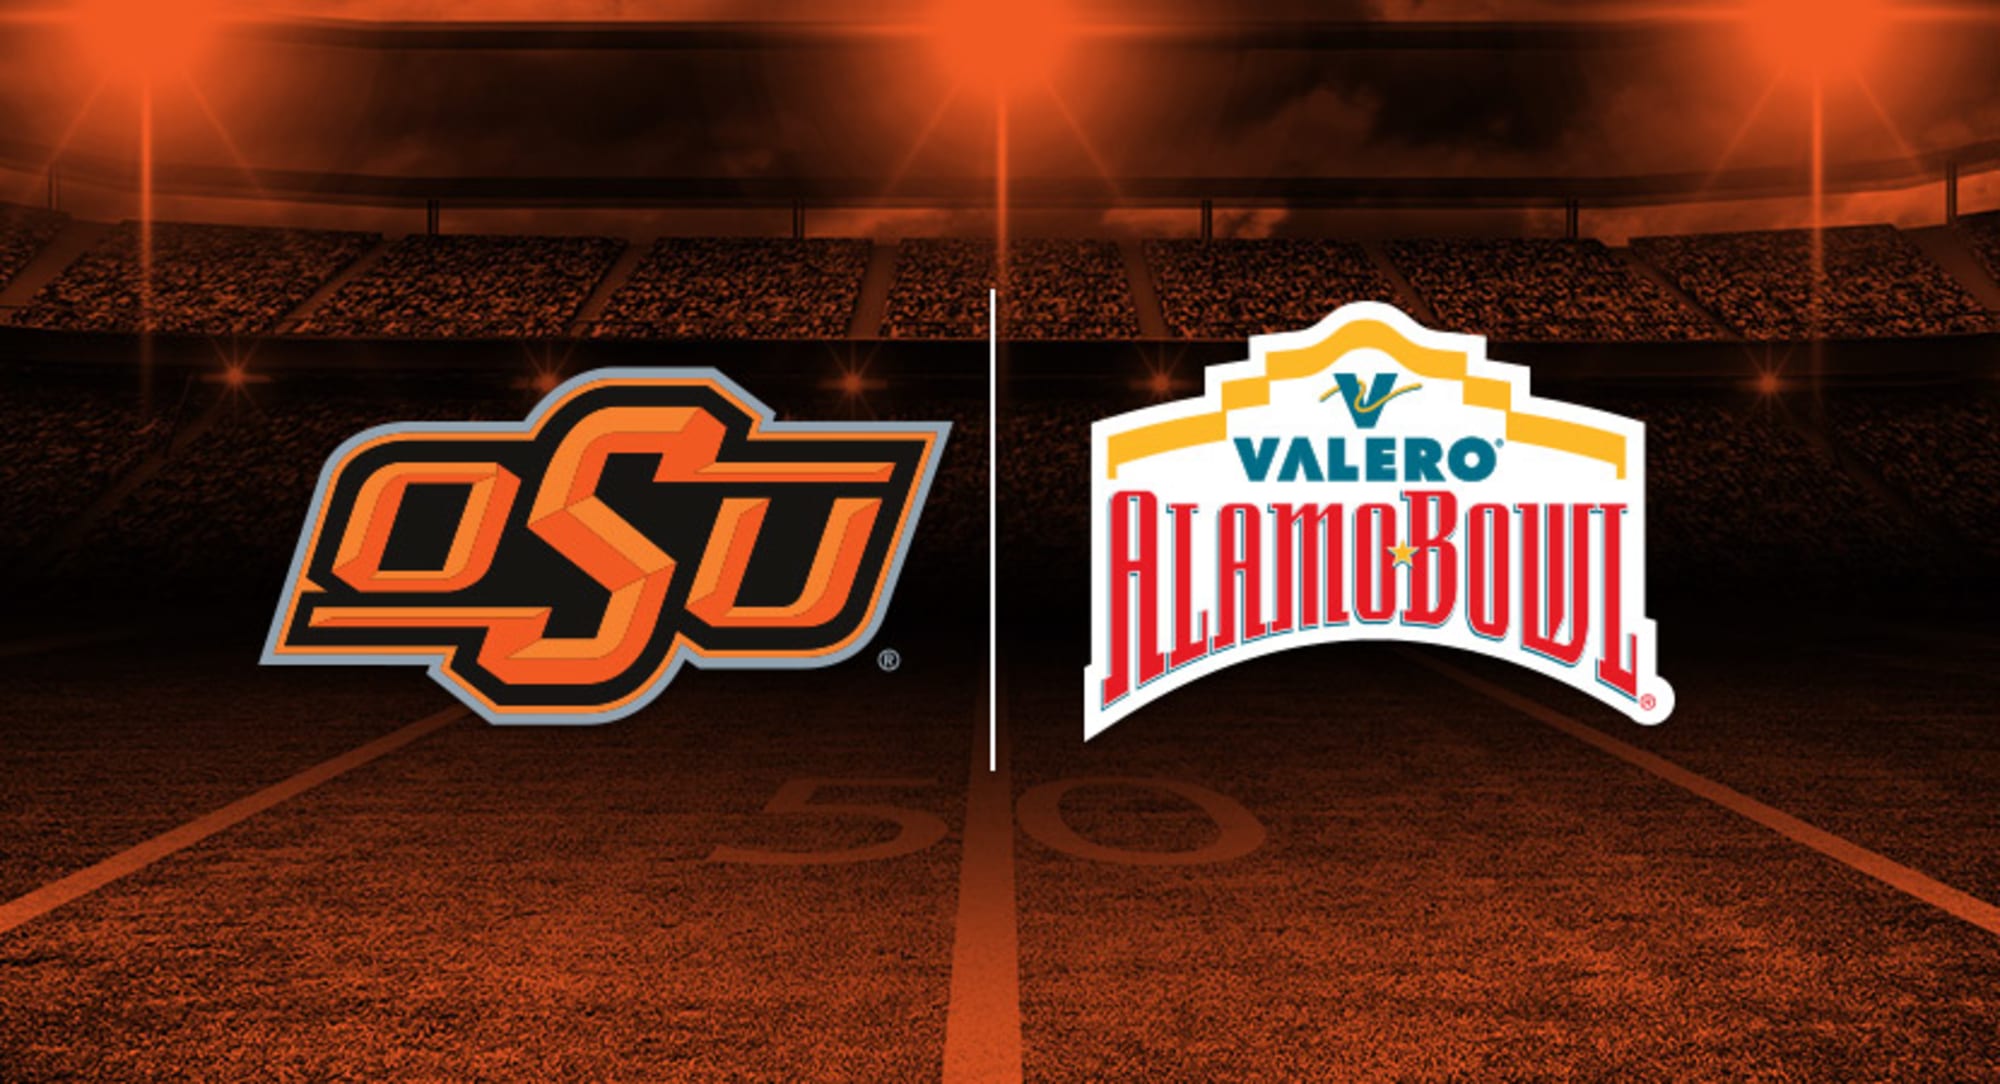 Watch Oklahoma State play in the Alamo Bowl with PrimeSport